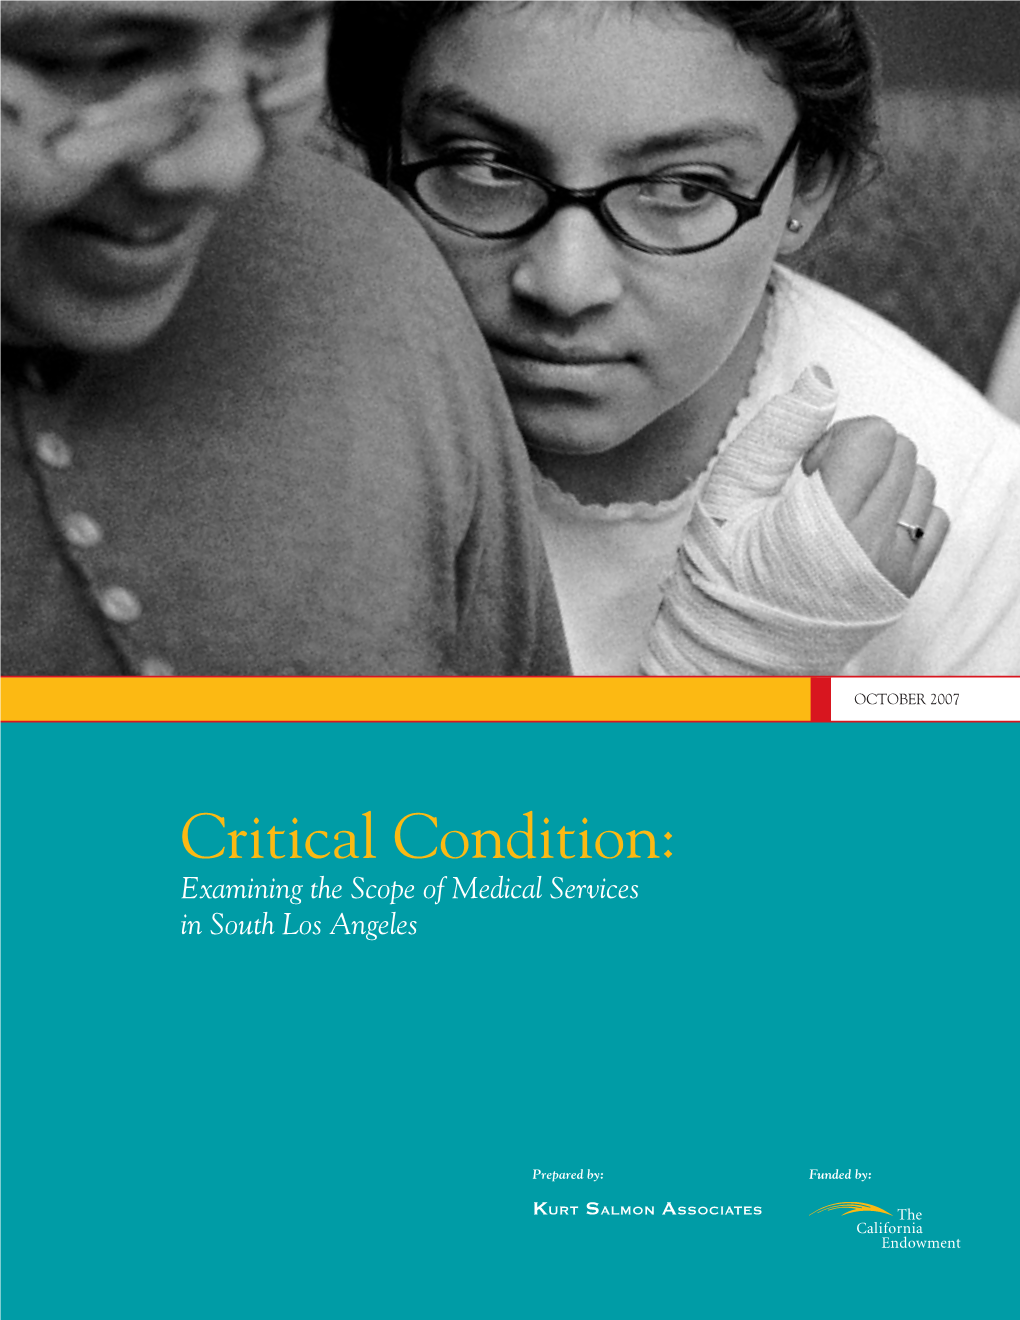 Critical Condition: Examining the Scope of Medical Services in South Los Angeles